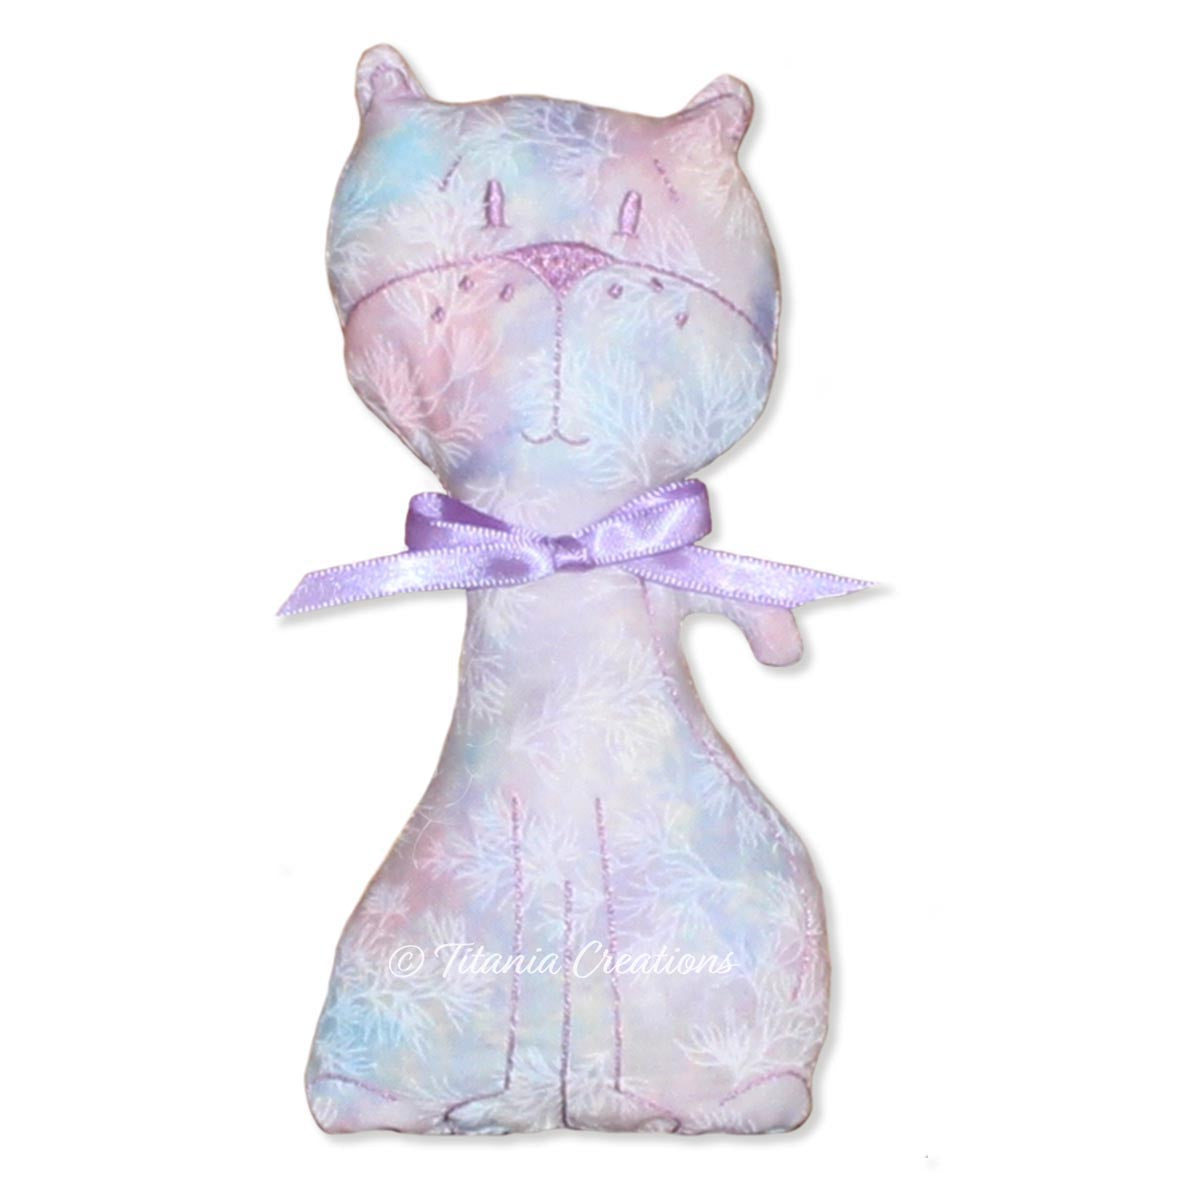 ITH Whimsical Cat Stuffie 5x7 6x10